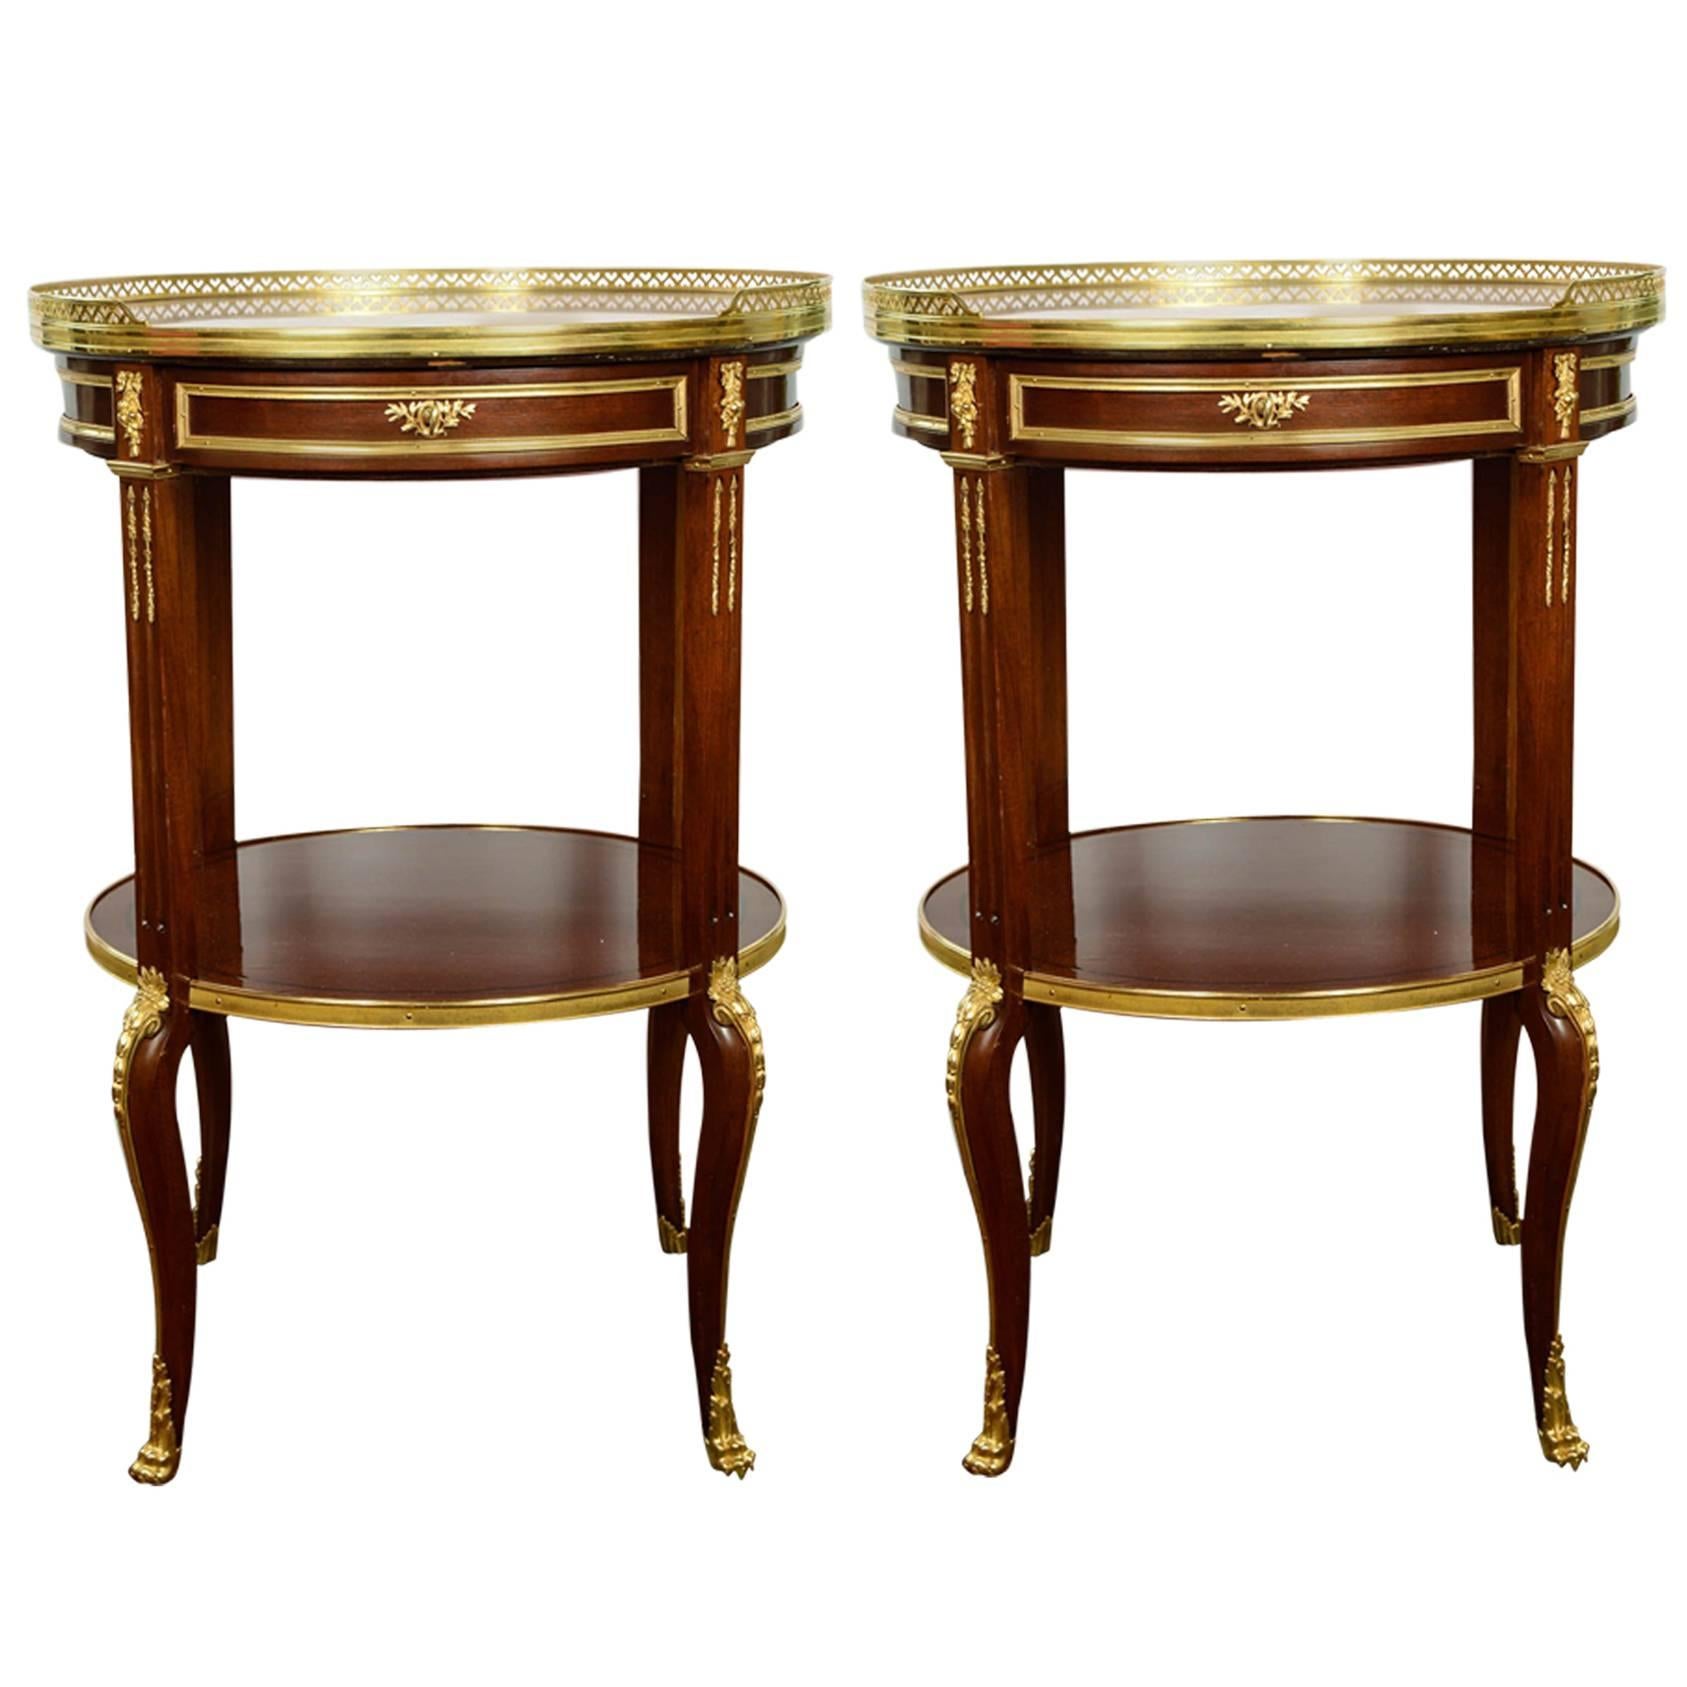 Pair of Gueridons Louis XVI Style For Sale